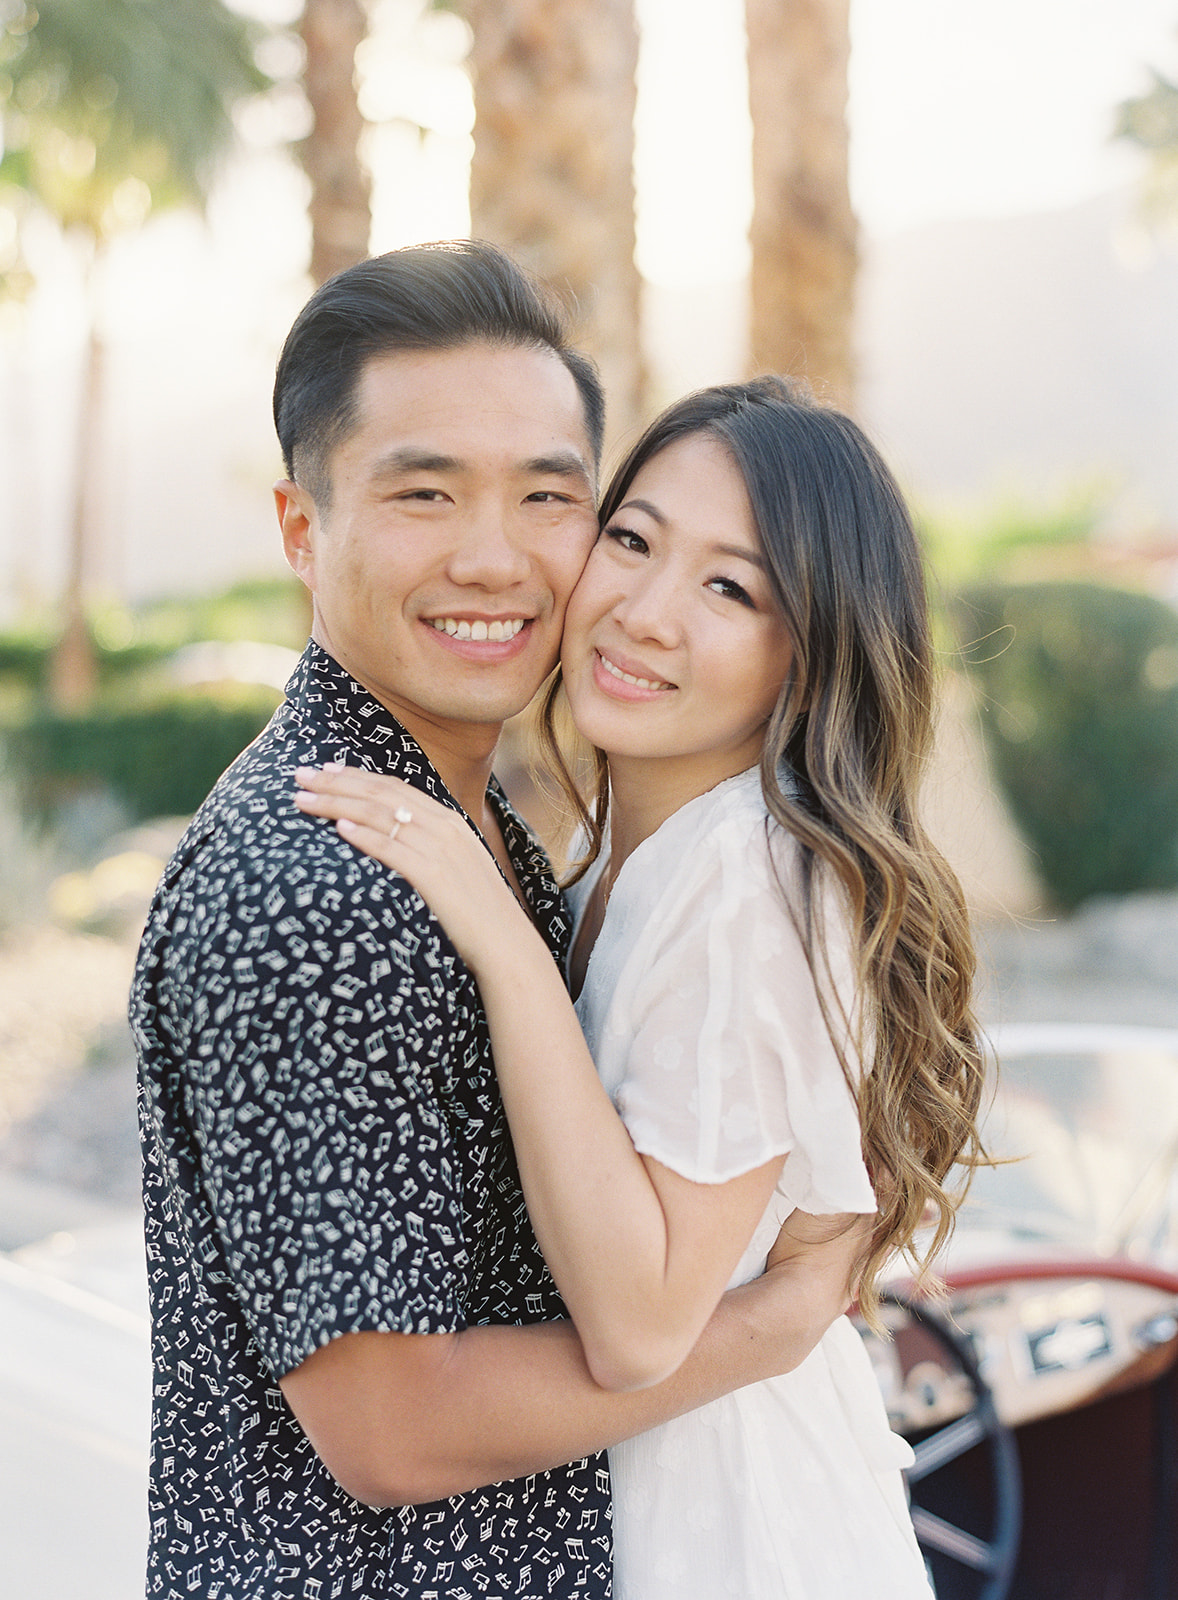 Palm Springs Engagement Photos